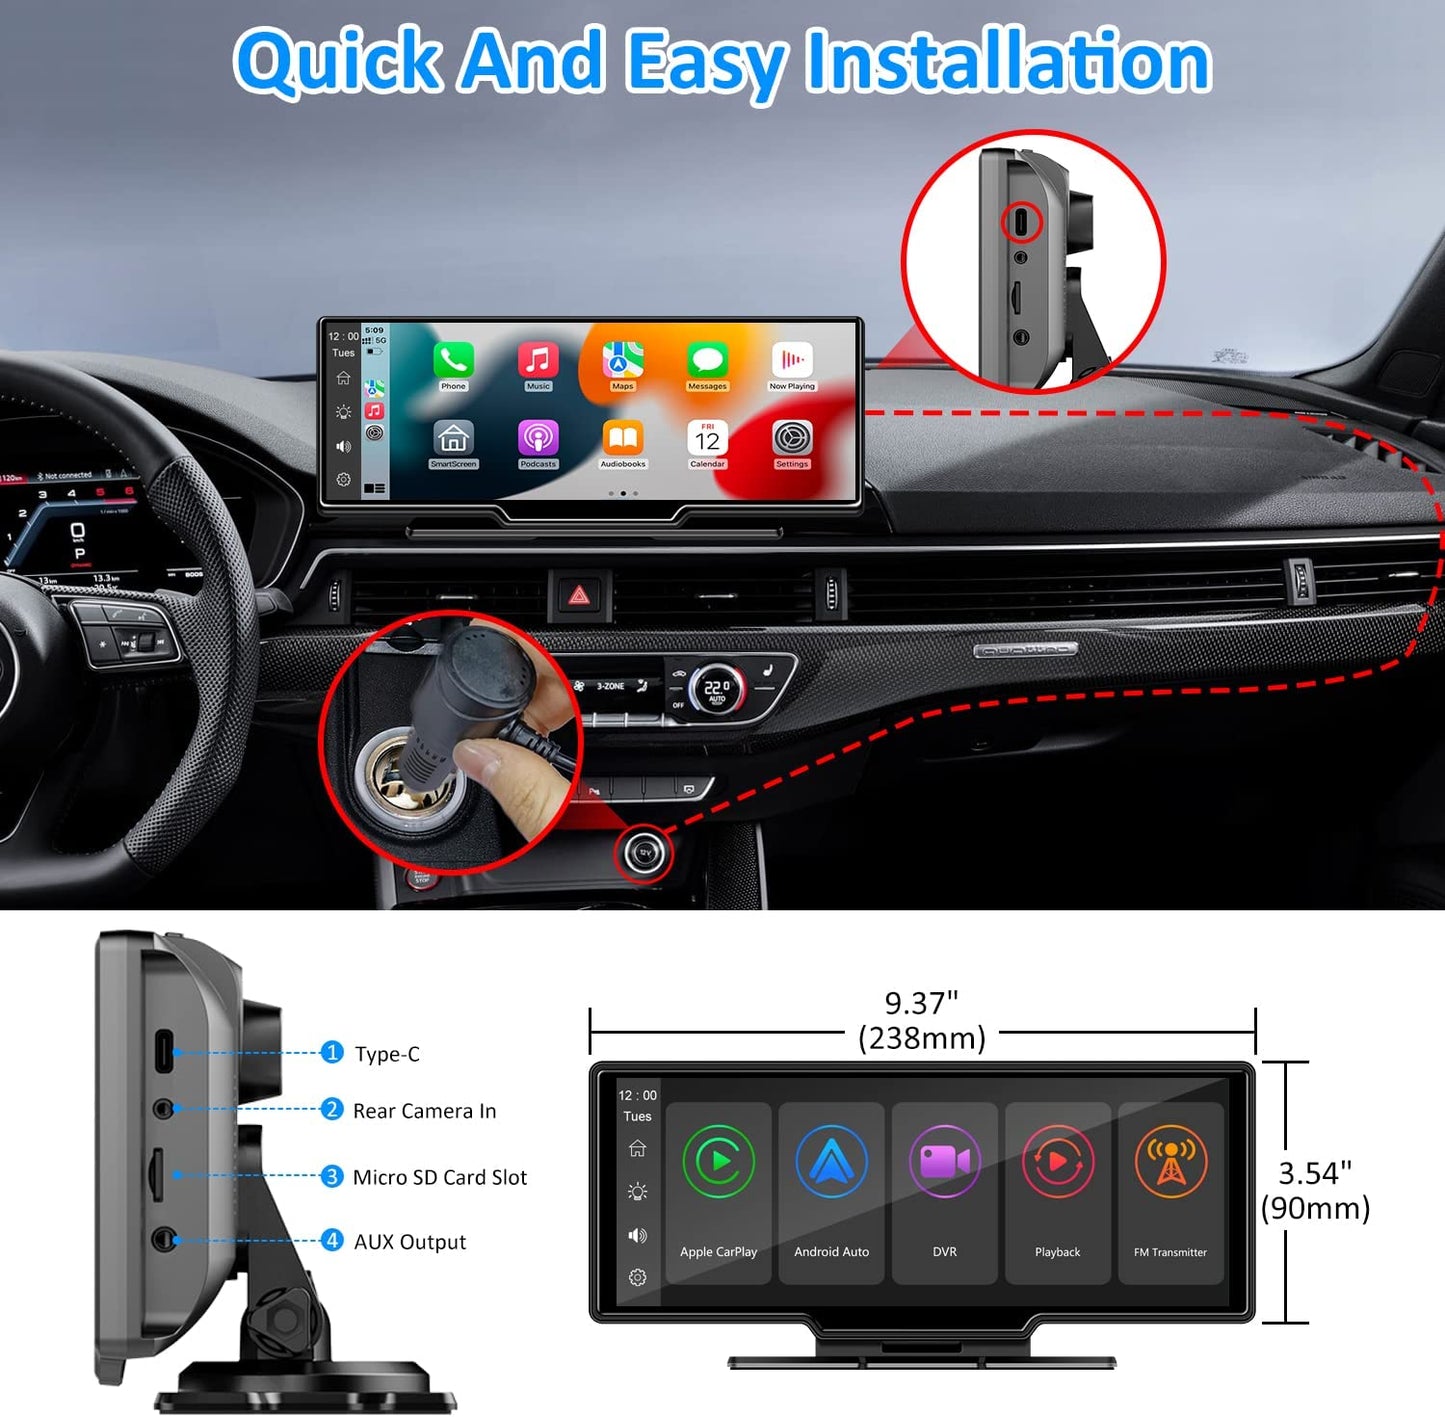 10.26 inches Wireless Carplay Screen & Android Auto, 1080P Camera Options, HD IPS Display, Adjustable, Detachable, Bluetooth, MirrorCast, Car Stereo, Radio, FM Transmitter